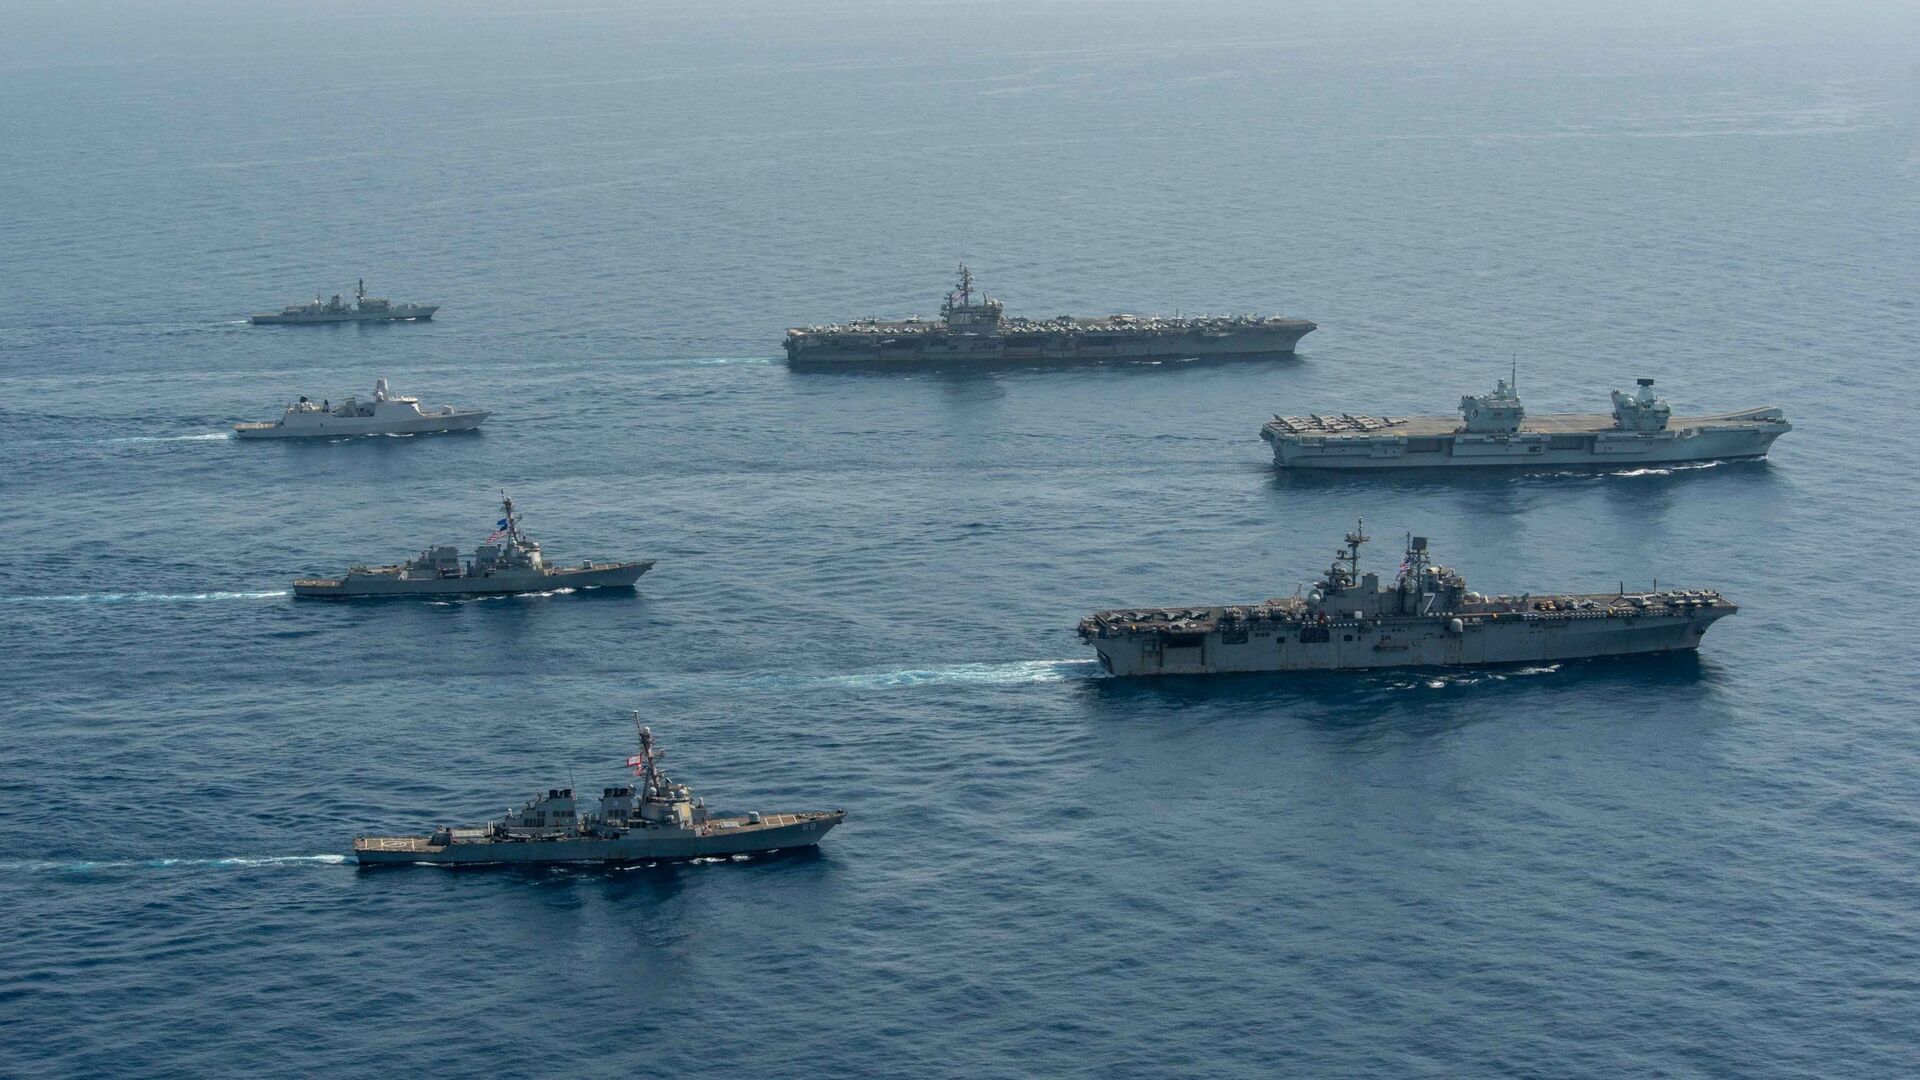 Ships of the UK Carrier Strike Group, USS Ronald Reagan Carrier Strike Group, and Iwo Jima Amphibious Ready Group operate in formation in the Gulf of Aden, July 12. - Sputnik International, 1920, 14.07.2021